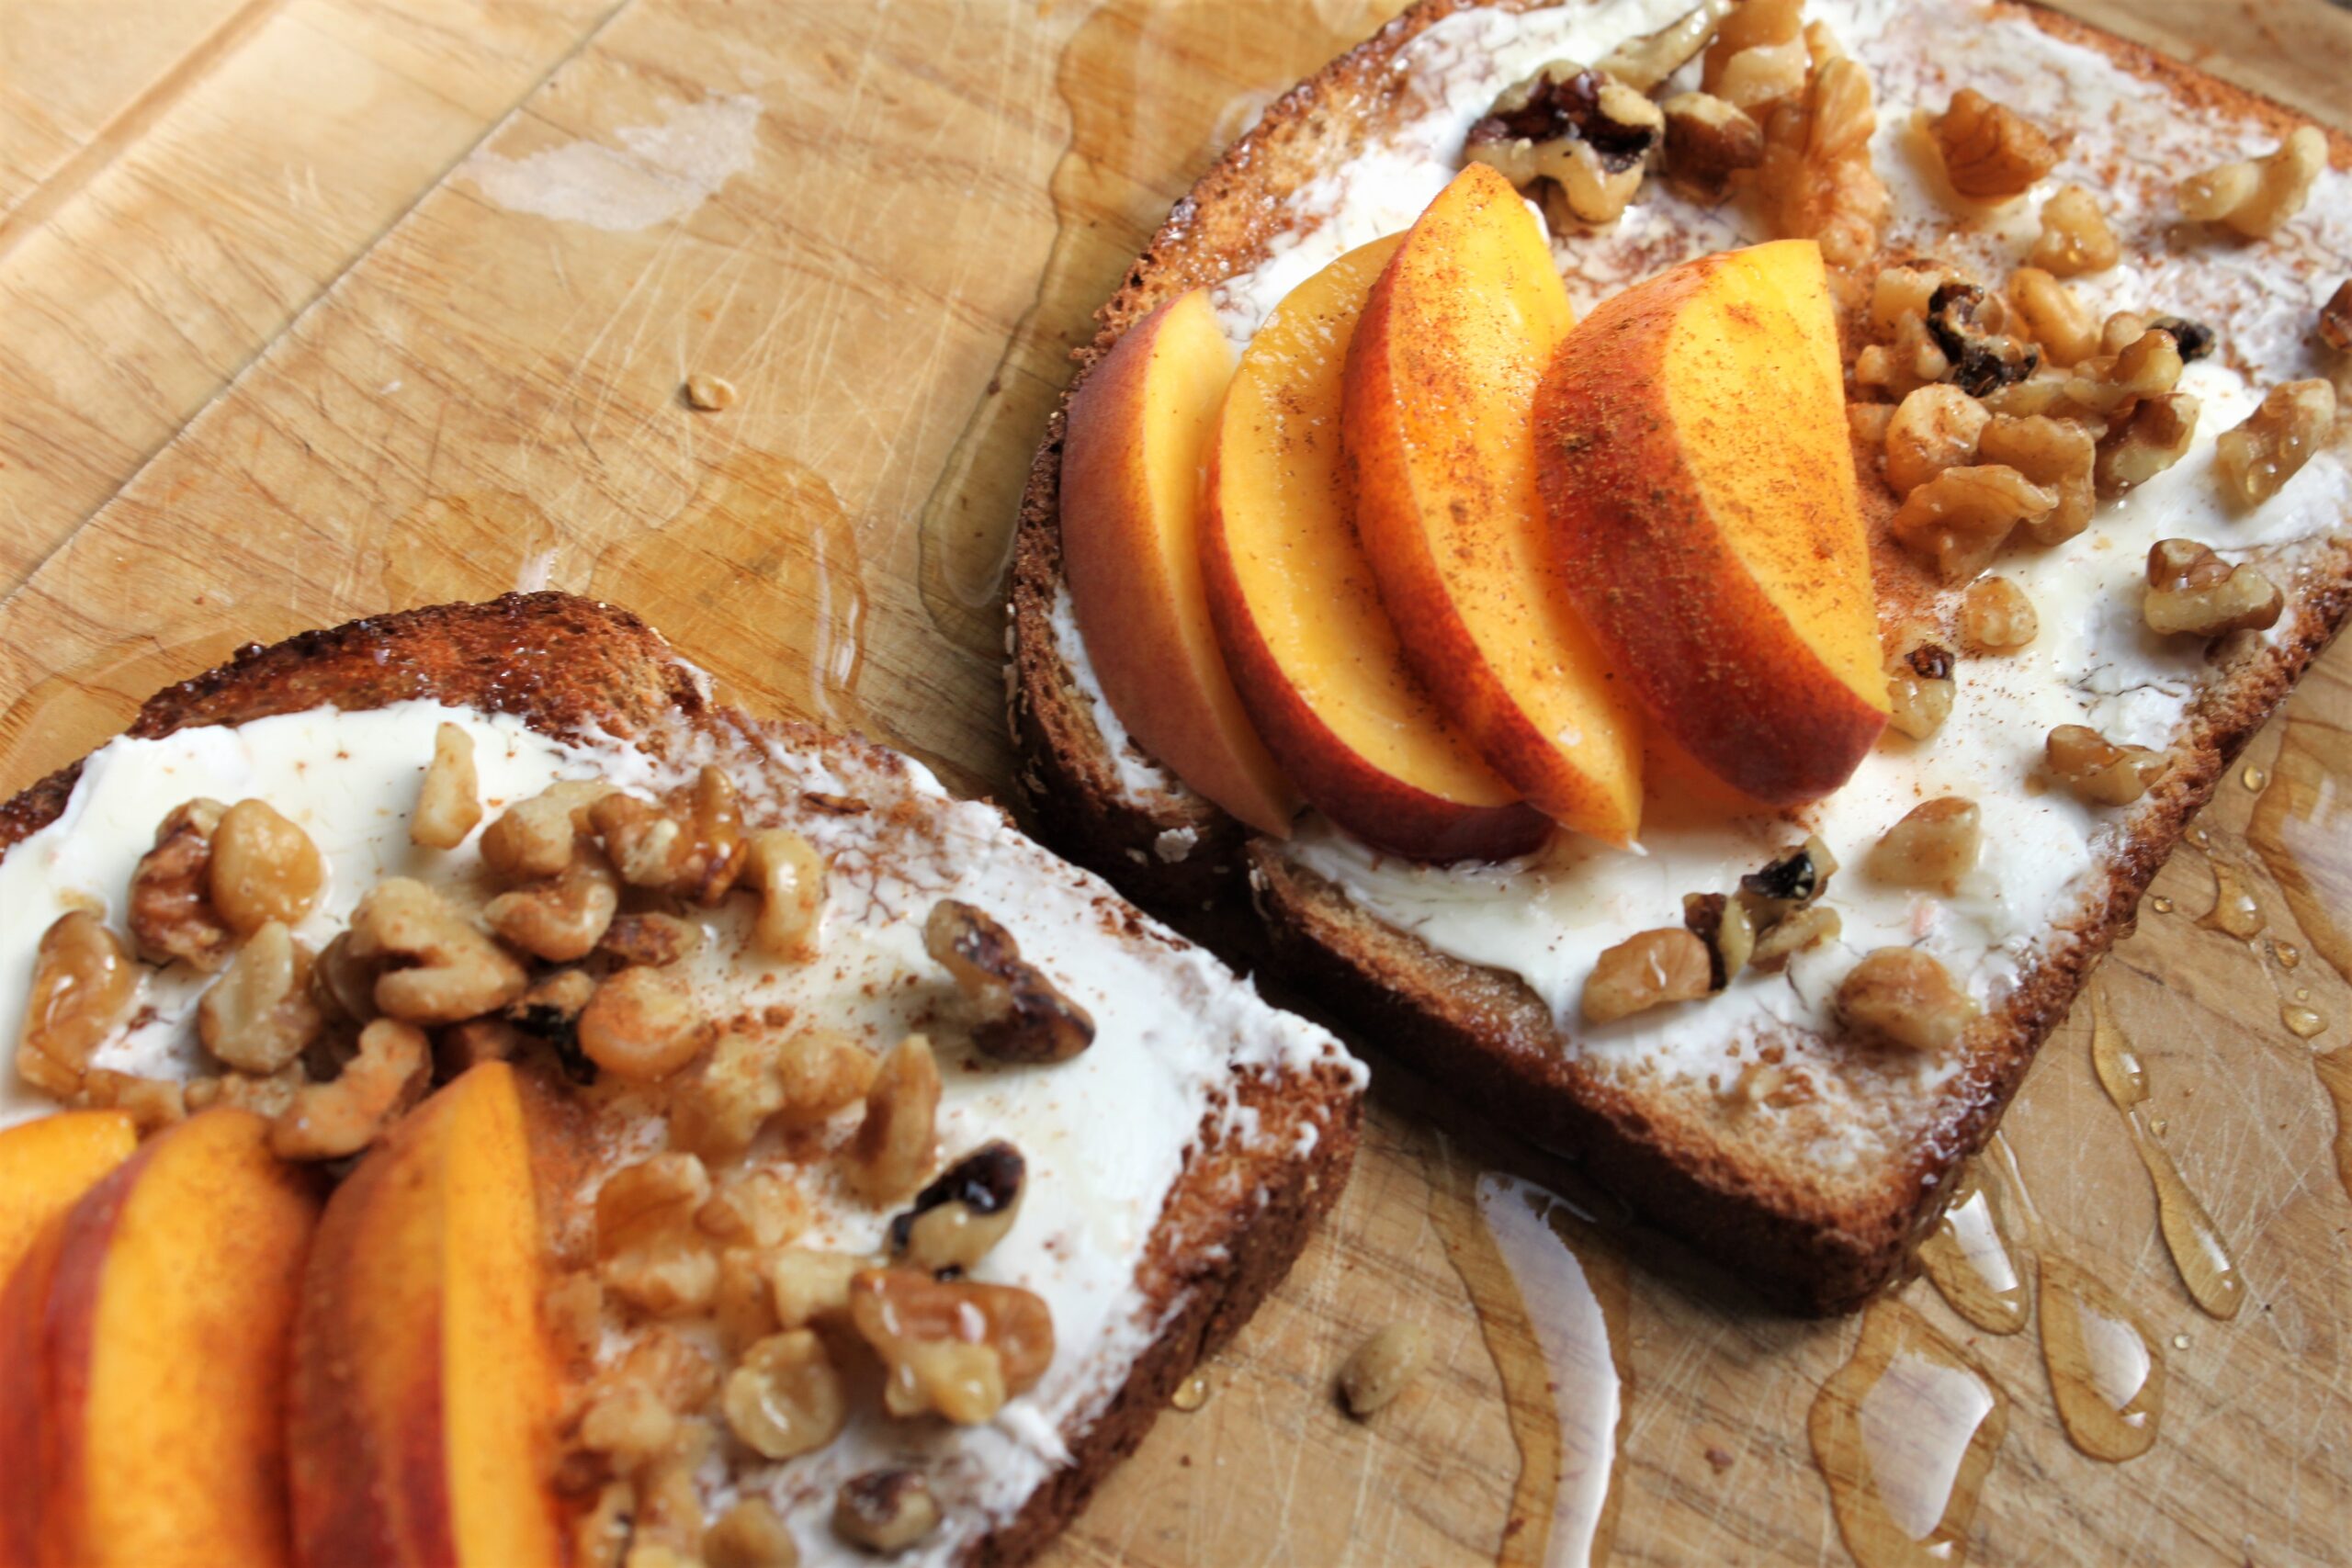 peaches and cream cheese toast is a great breakfast or snack